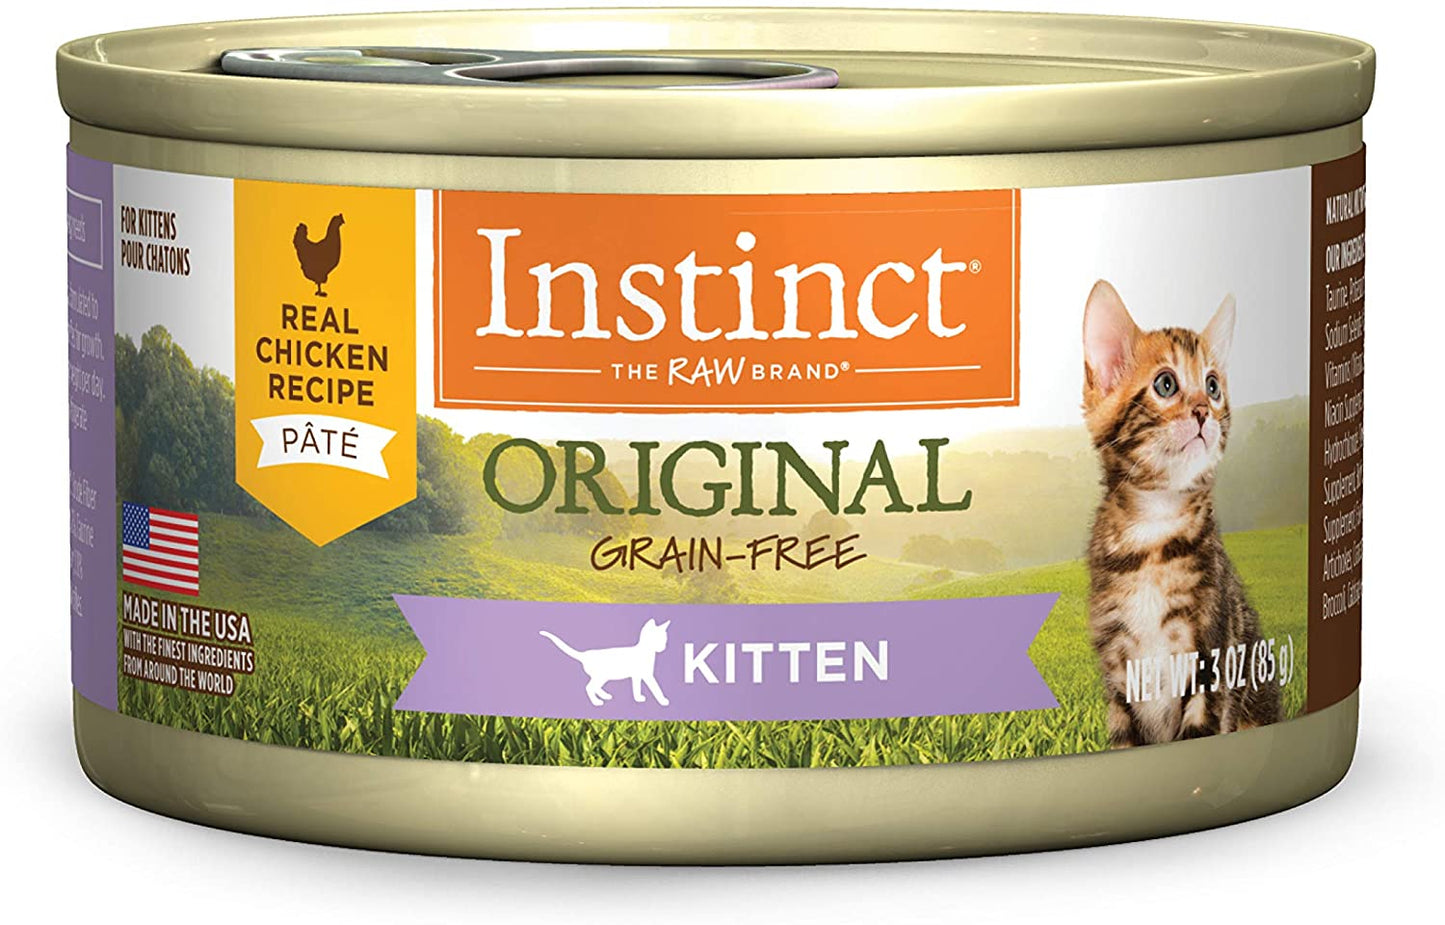 Nature's Variety Instinct Chicken for Kittens Formula 12 x 5.5 oz.  cans